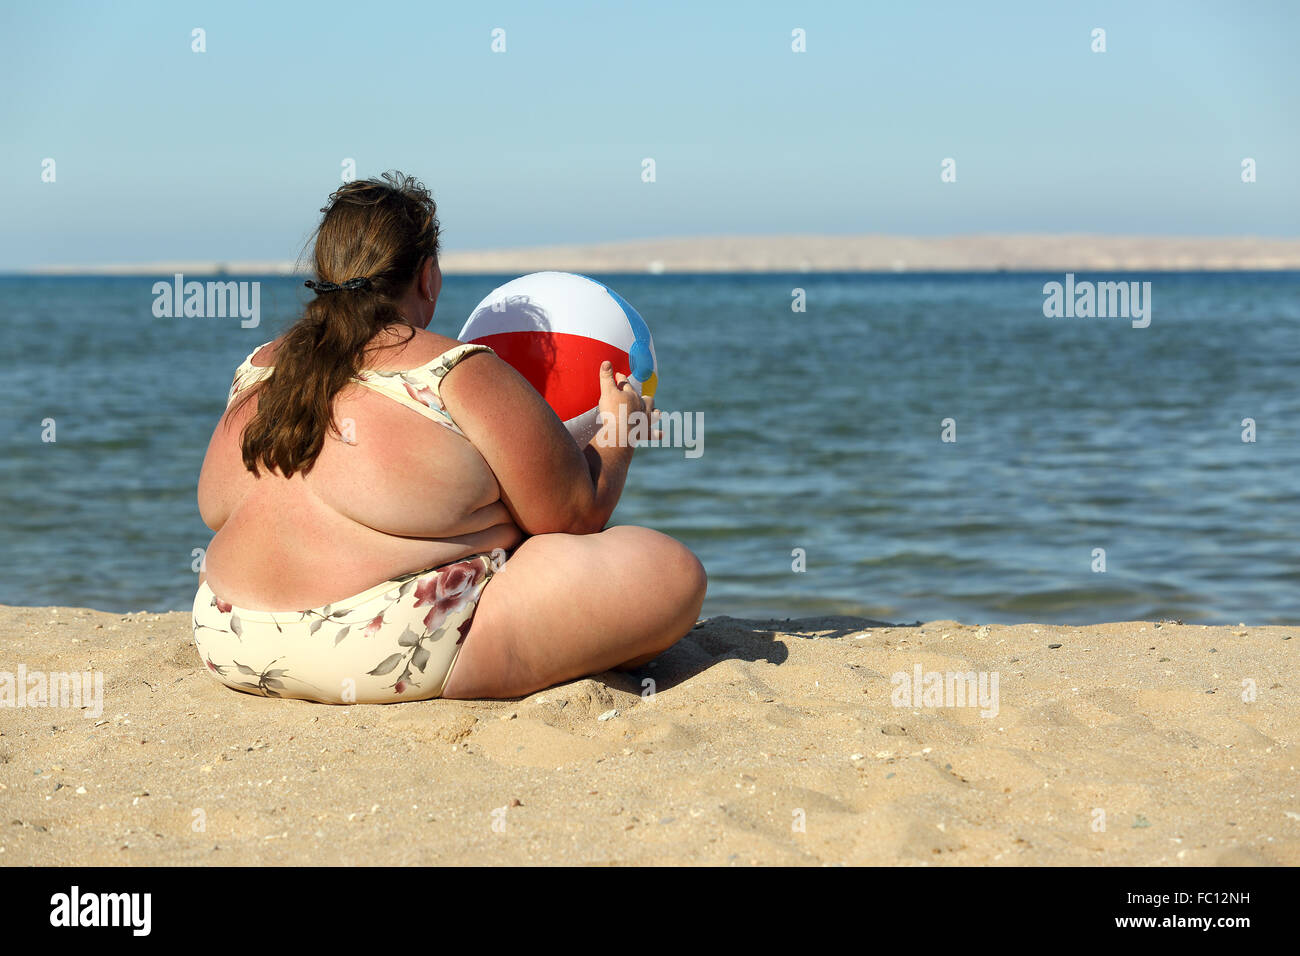 overweight woman with ball on beach Stock Photo